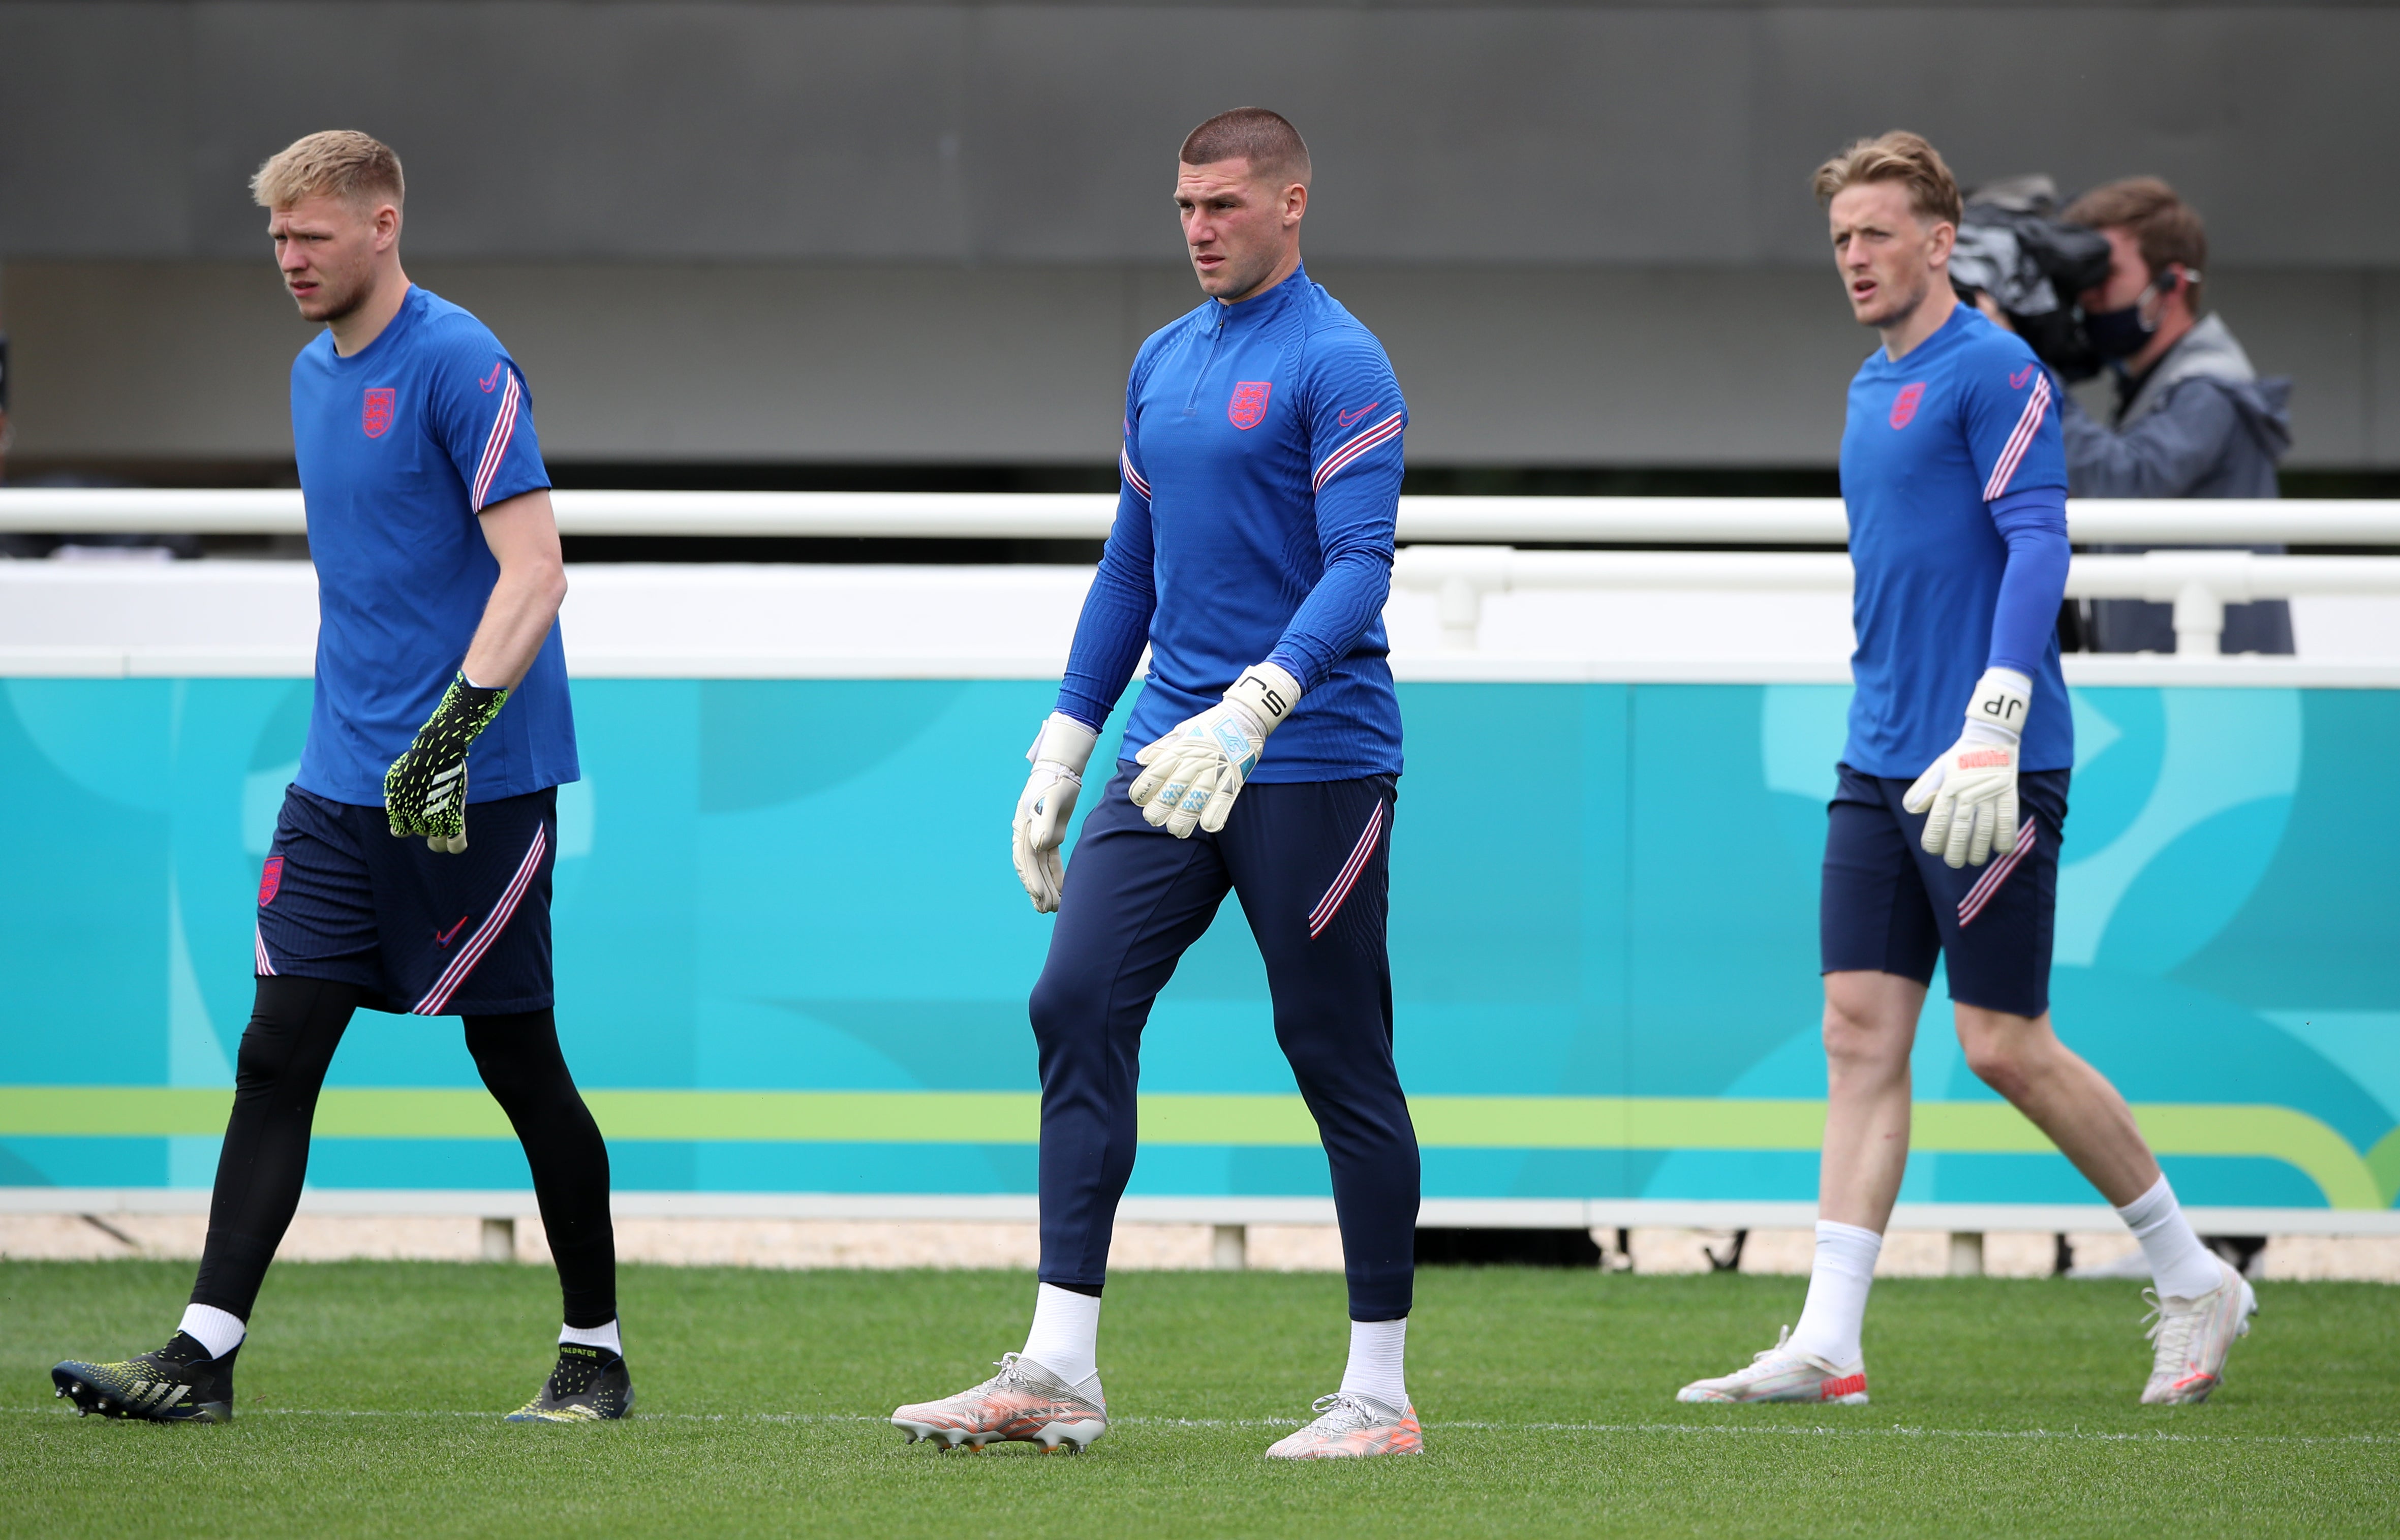 England’s goalkeepers have been hard to beat in 2021 (Nick Potts/PA)